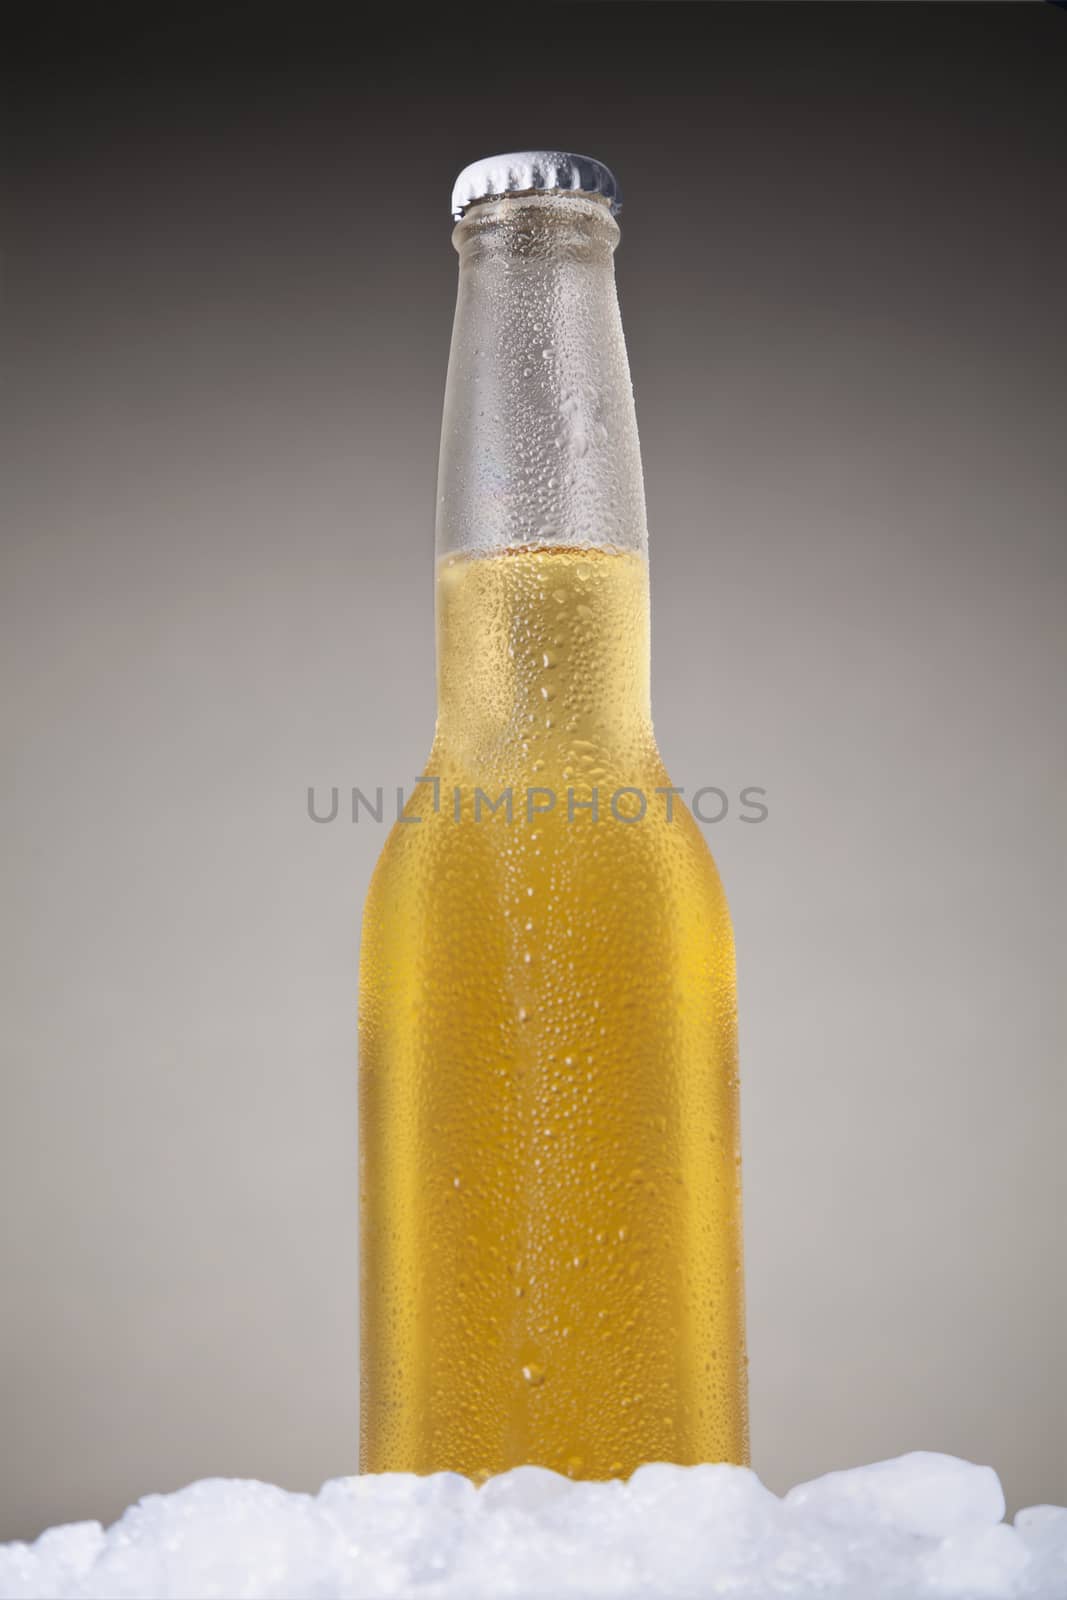 Mexican beer sitting on ice over a gray background.